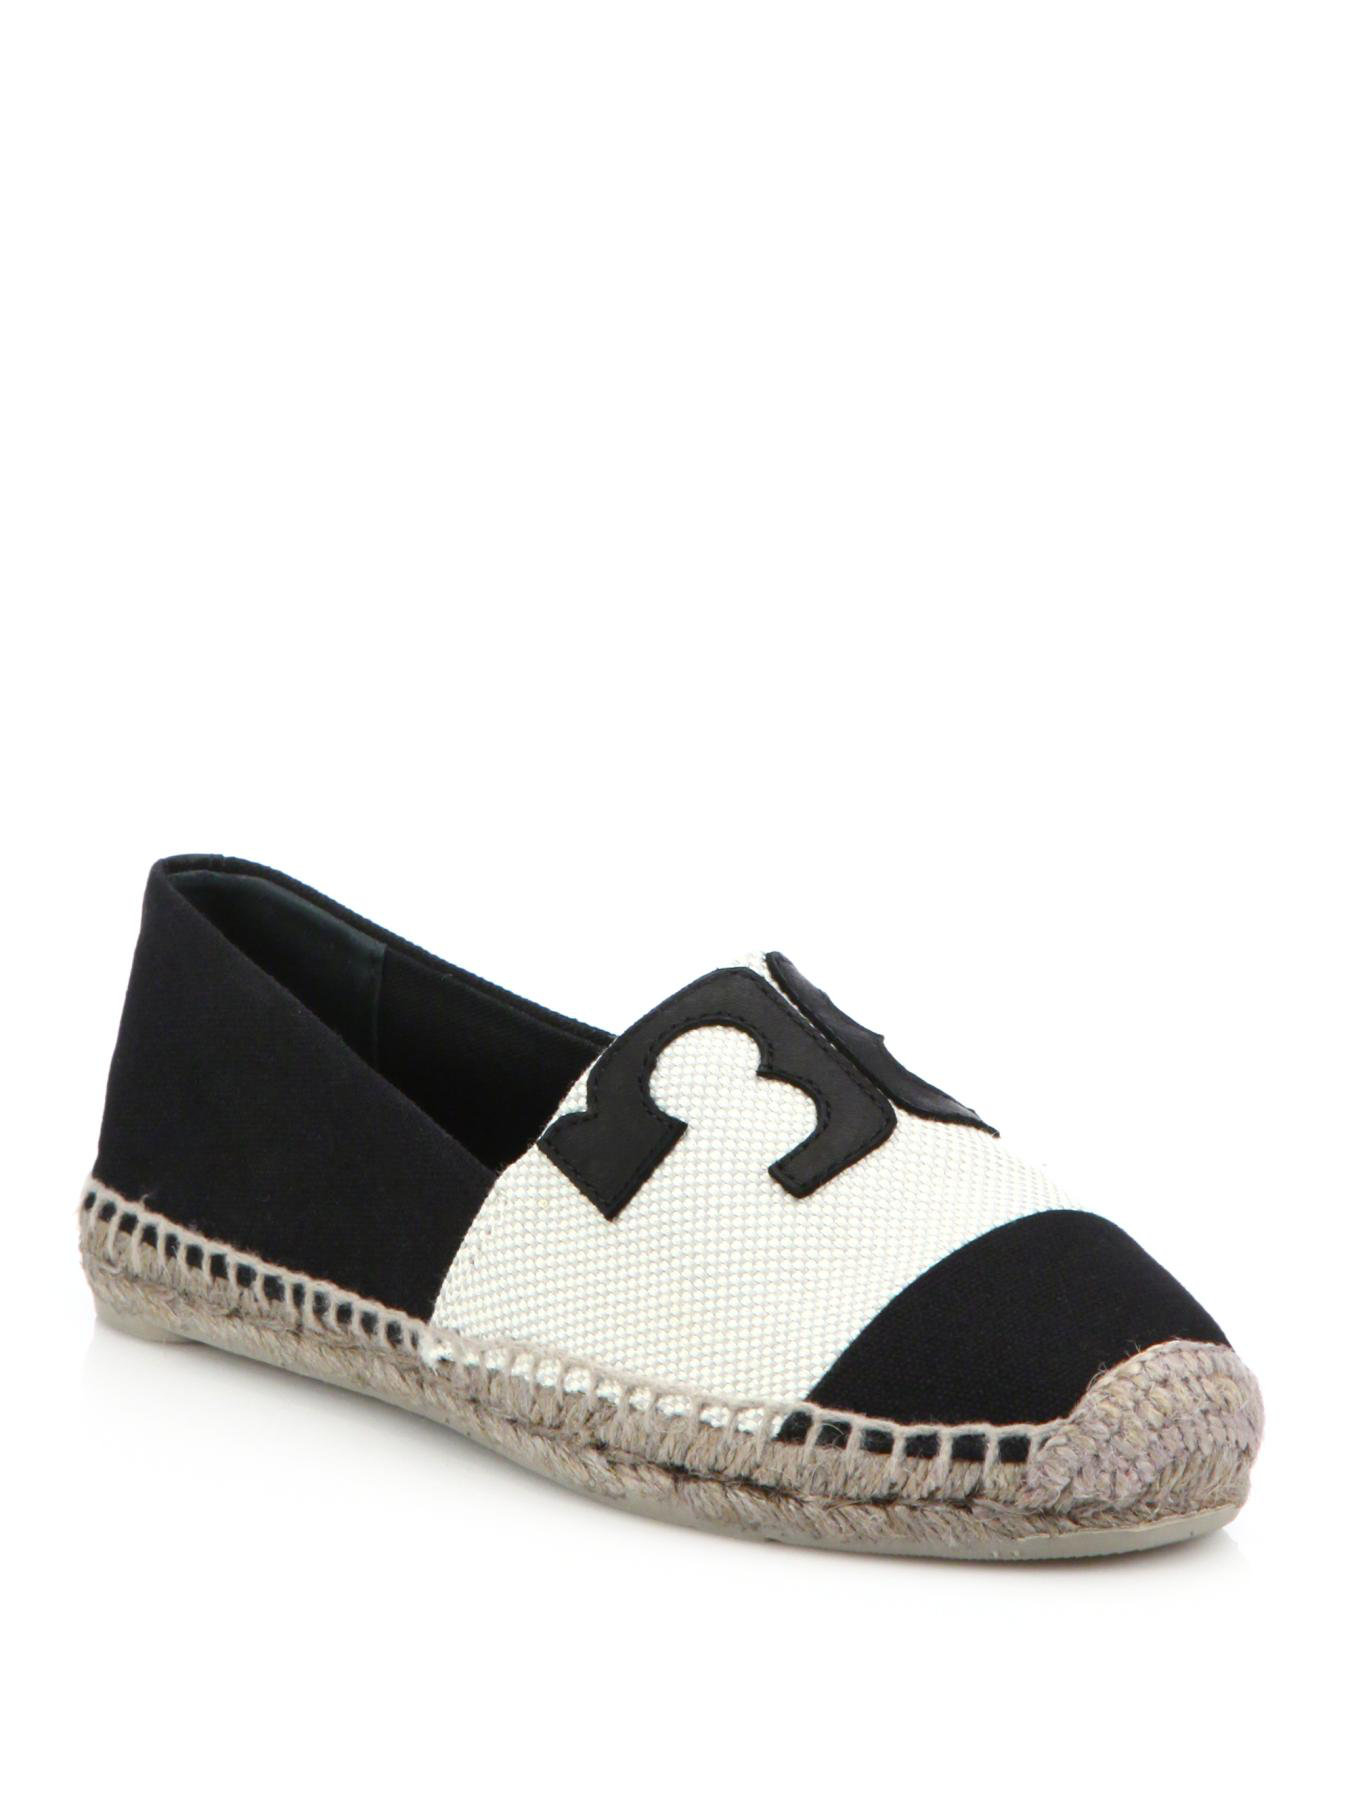 Tory Burch Black And White Espadrilles Poland, SAVE 52% -  